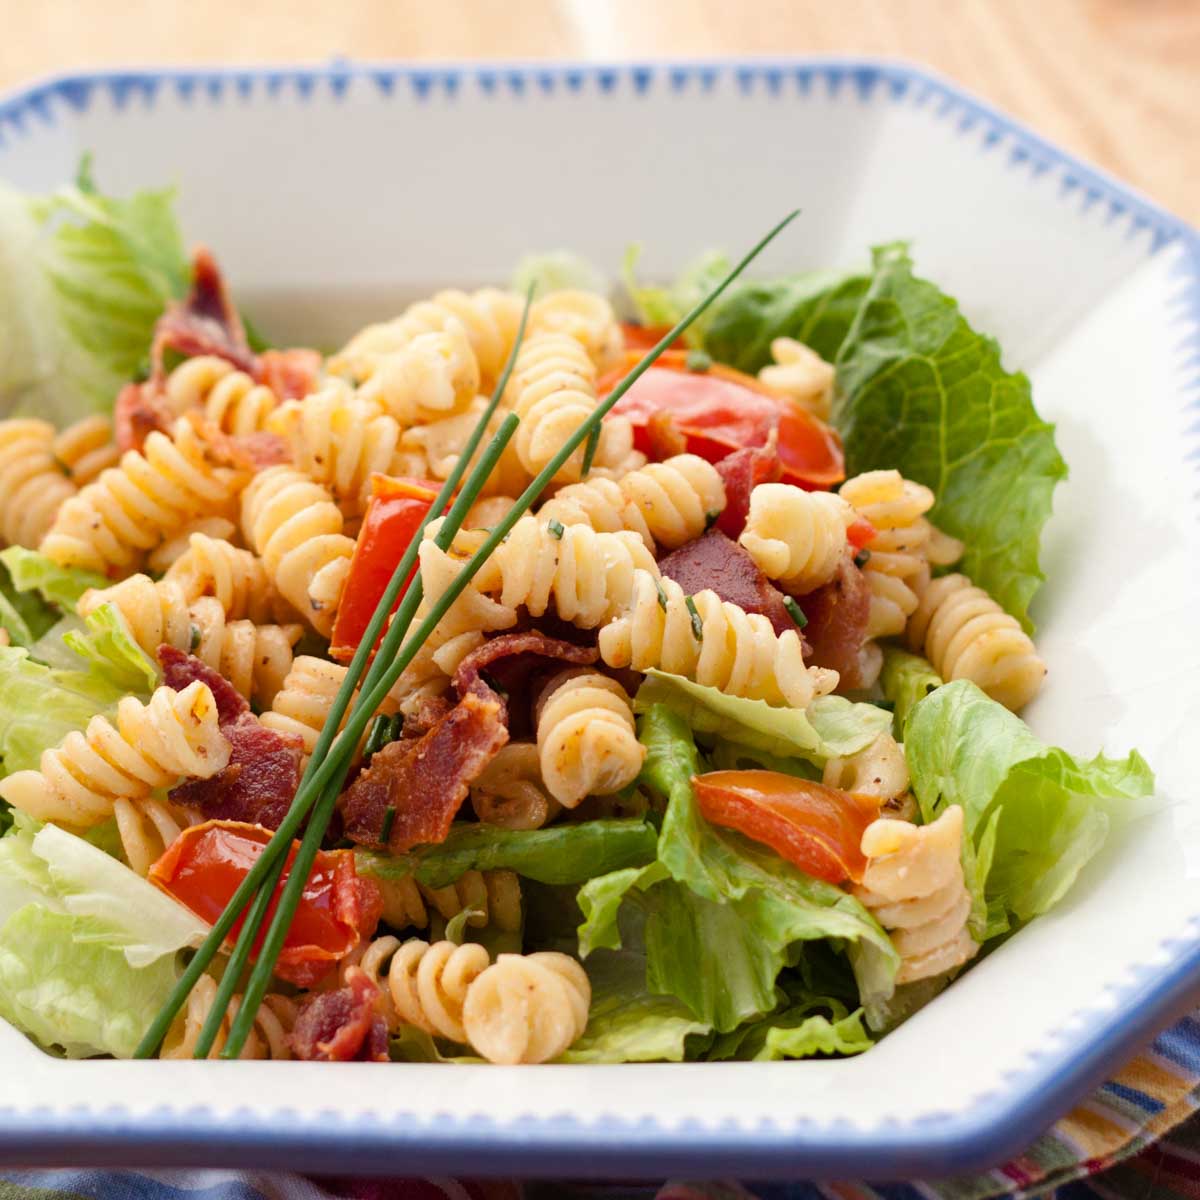 BLT pasta salad has corkscrew noodles, fresh lettuce, bacon, tomatoes, and fresh chives on top.